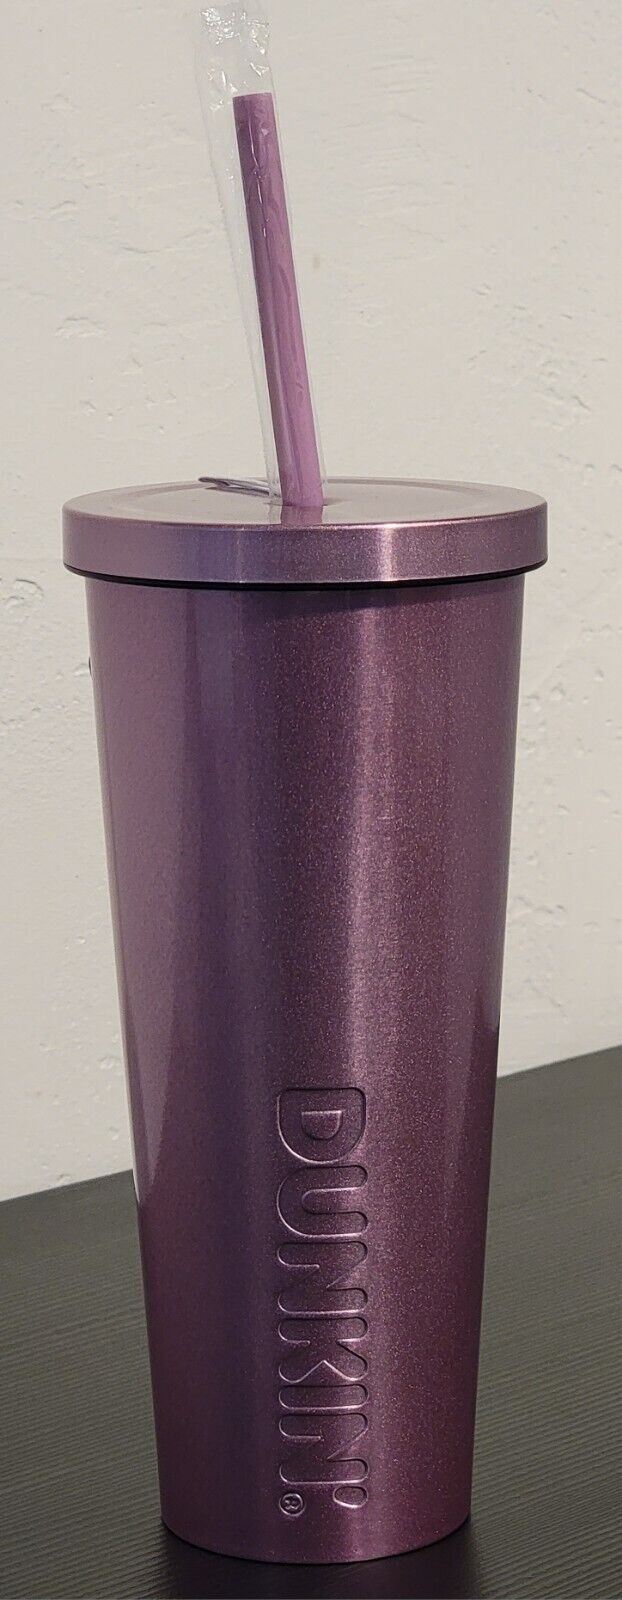 Dunkin Donuts 24oz Stainless Steel Sipper With Straw - Iridescent Pink Purple